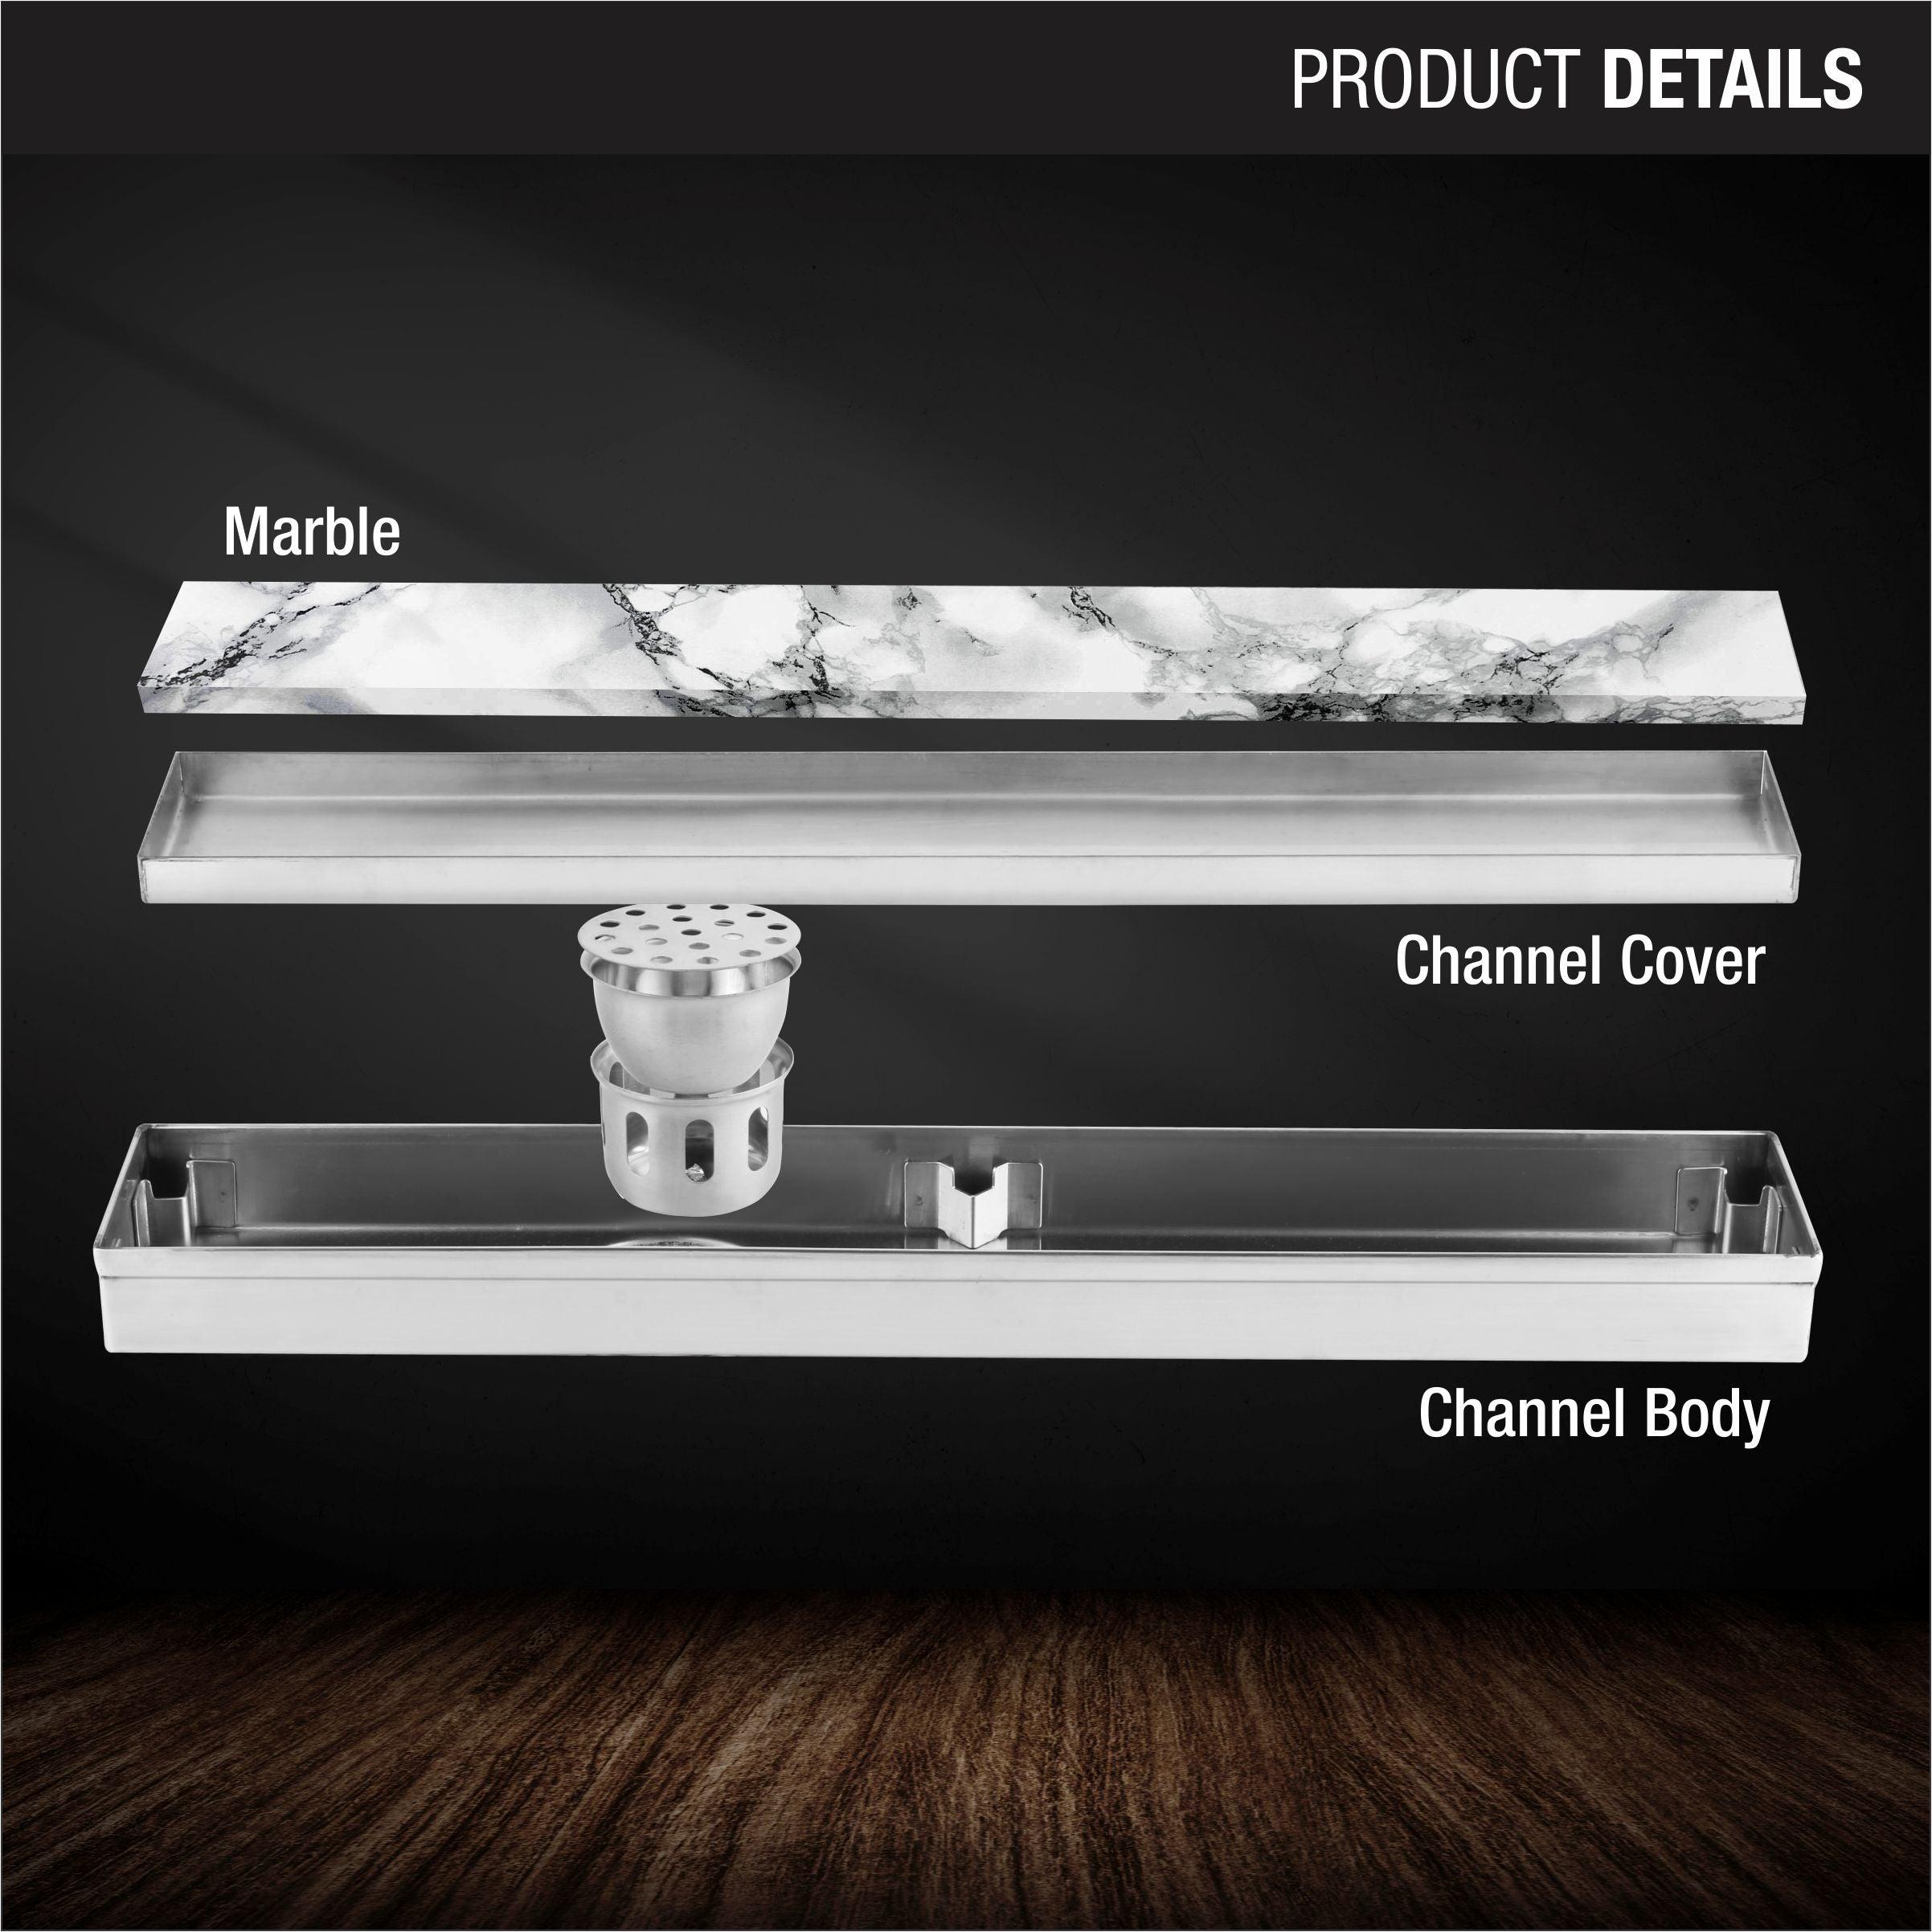 Marble Insert Shower Drain Channel (32 x 4 Inches) product details